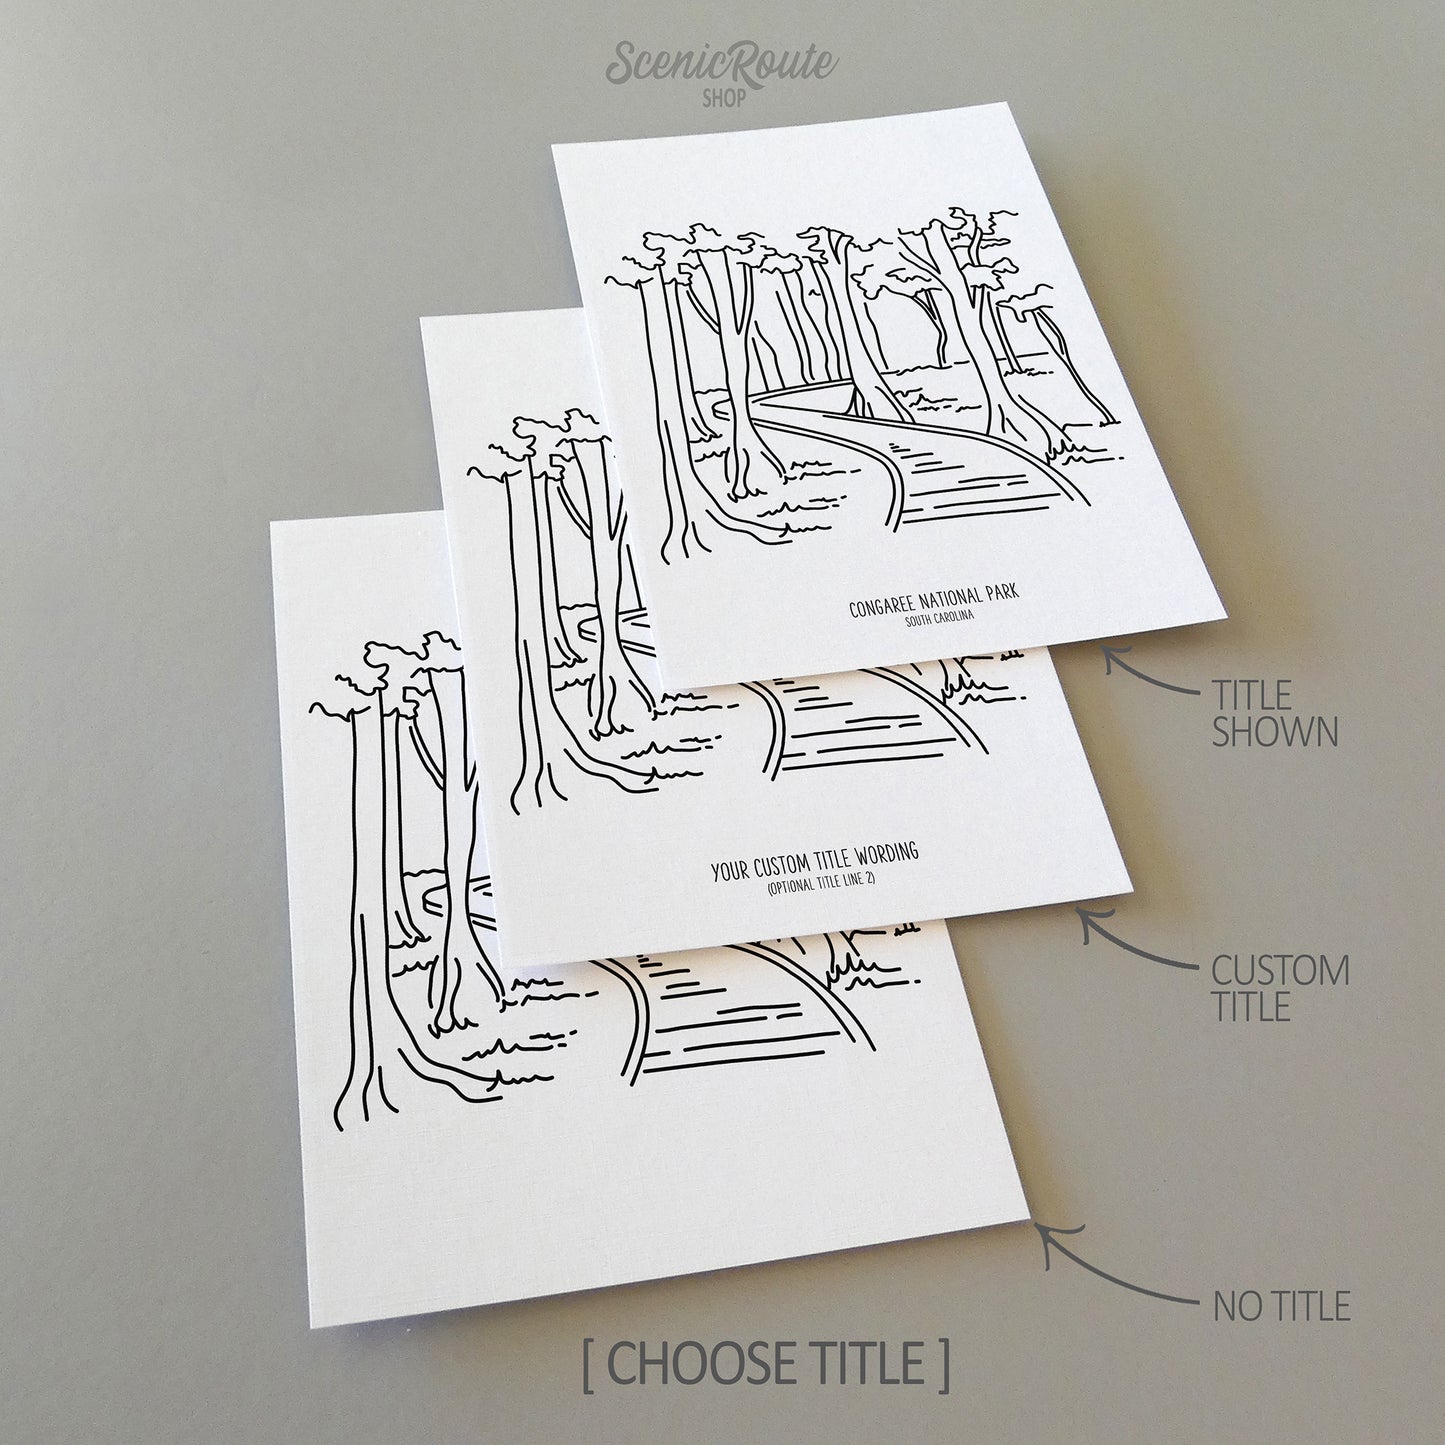 Three line art drawings of Congaree National Park on white linen paper with a gray background. The pieces are shown with title options that can be chosen and personalized.